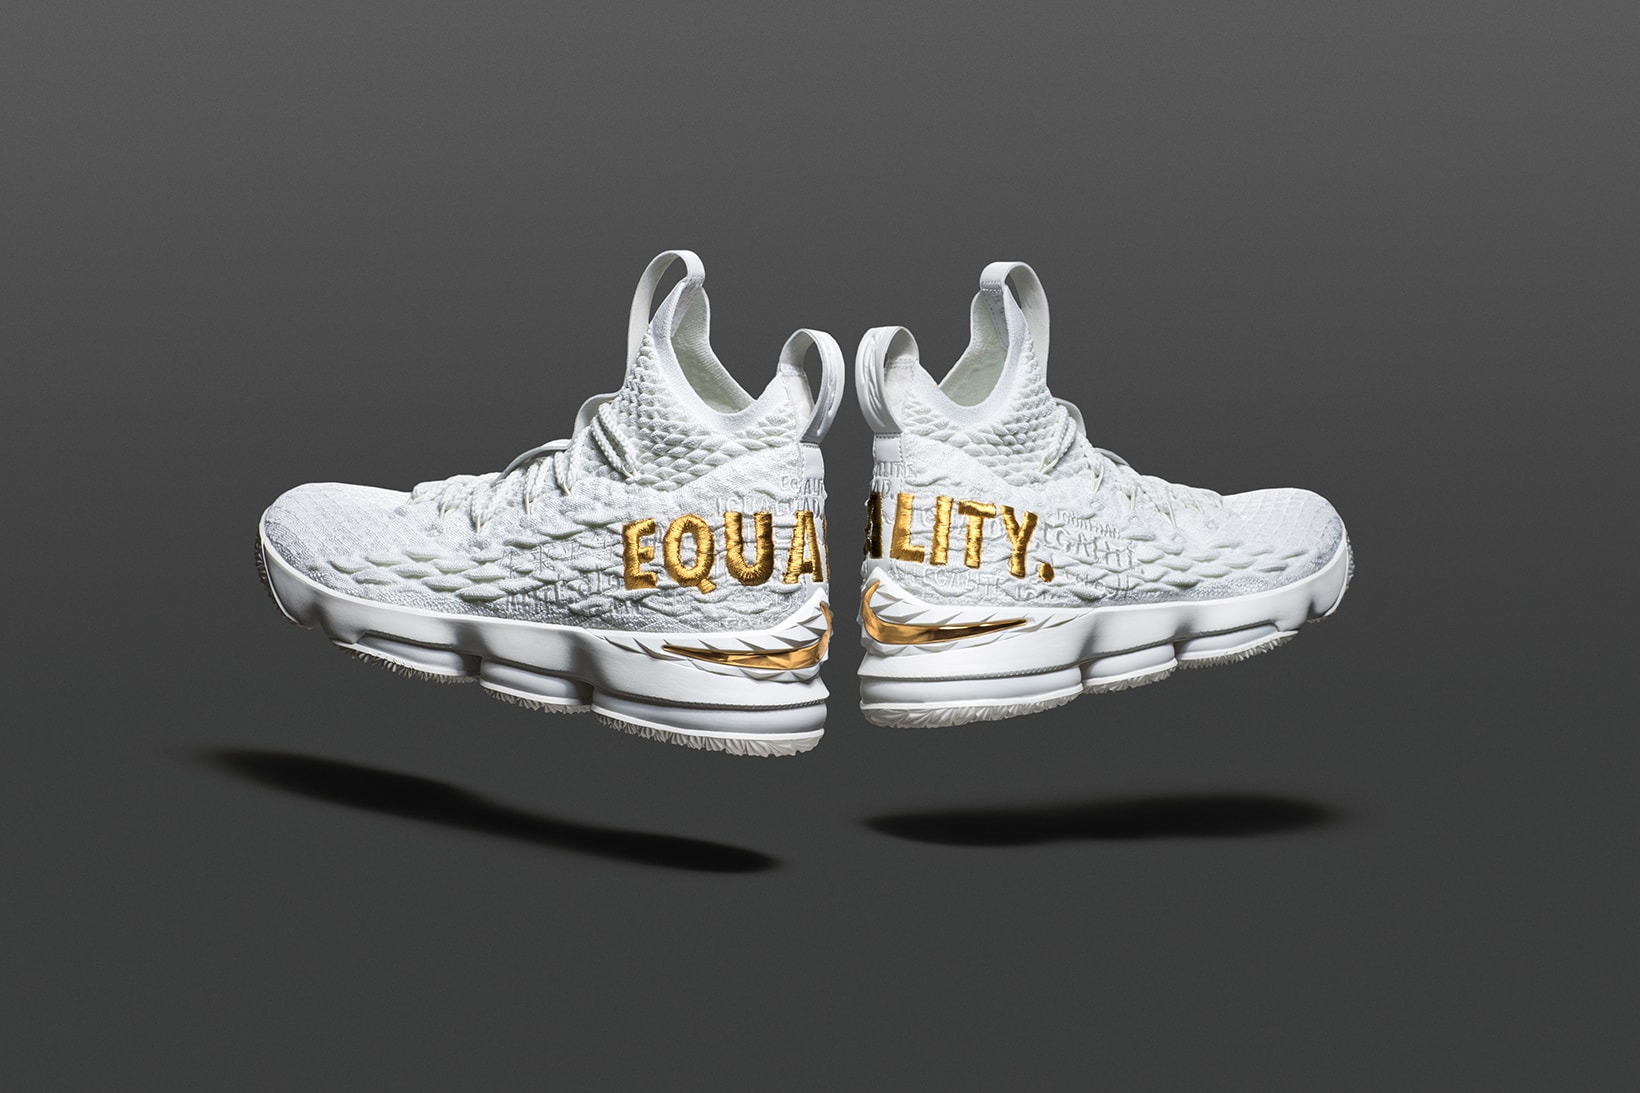 Nike LeBron 15 Equality raffle draw James footwear 2018 black white gold sneakers online release